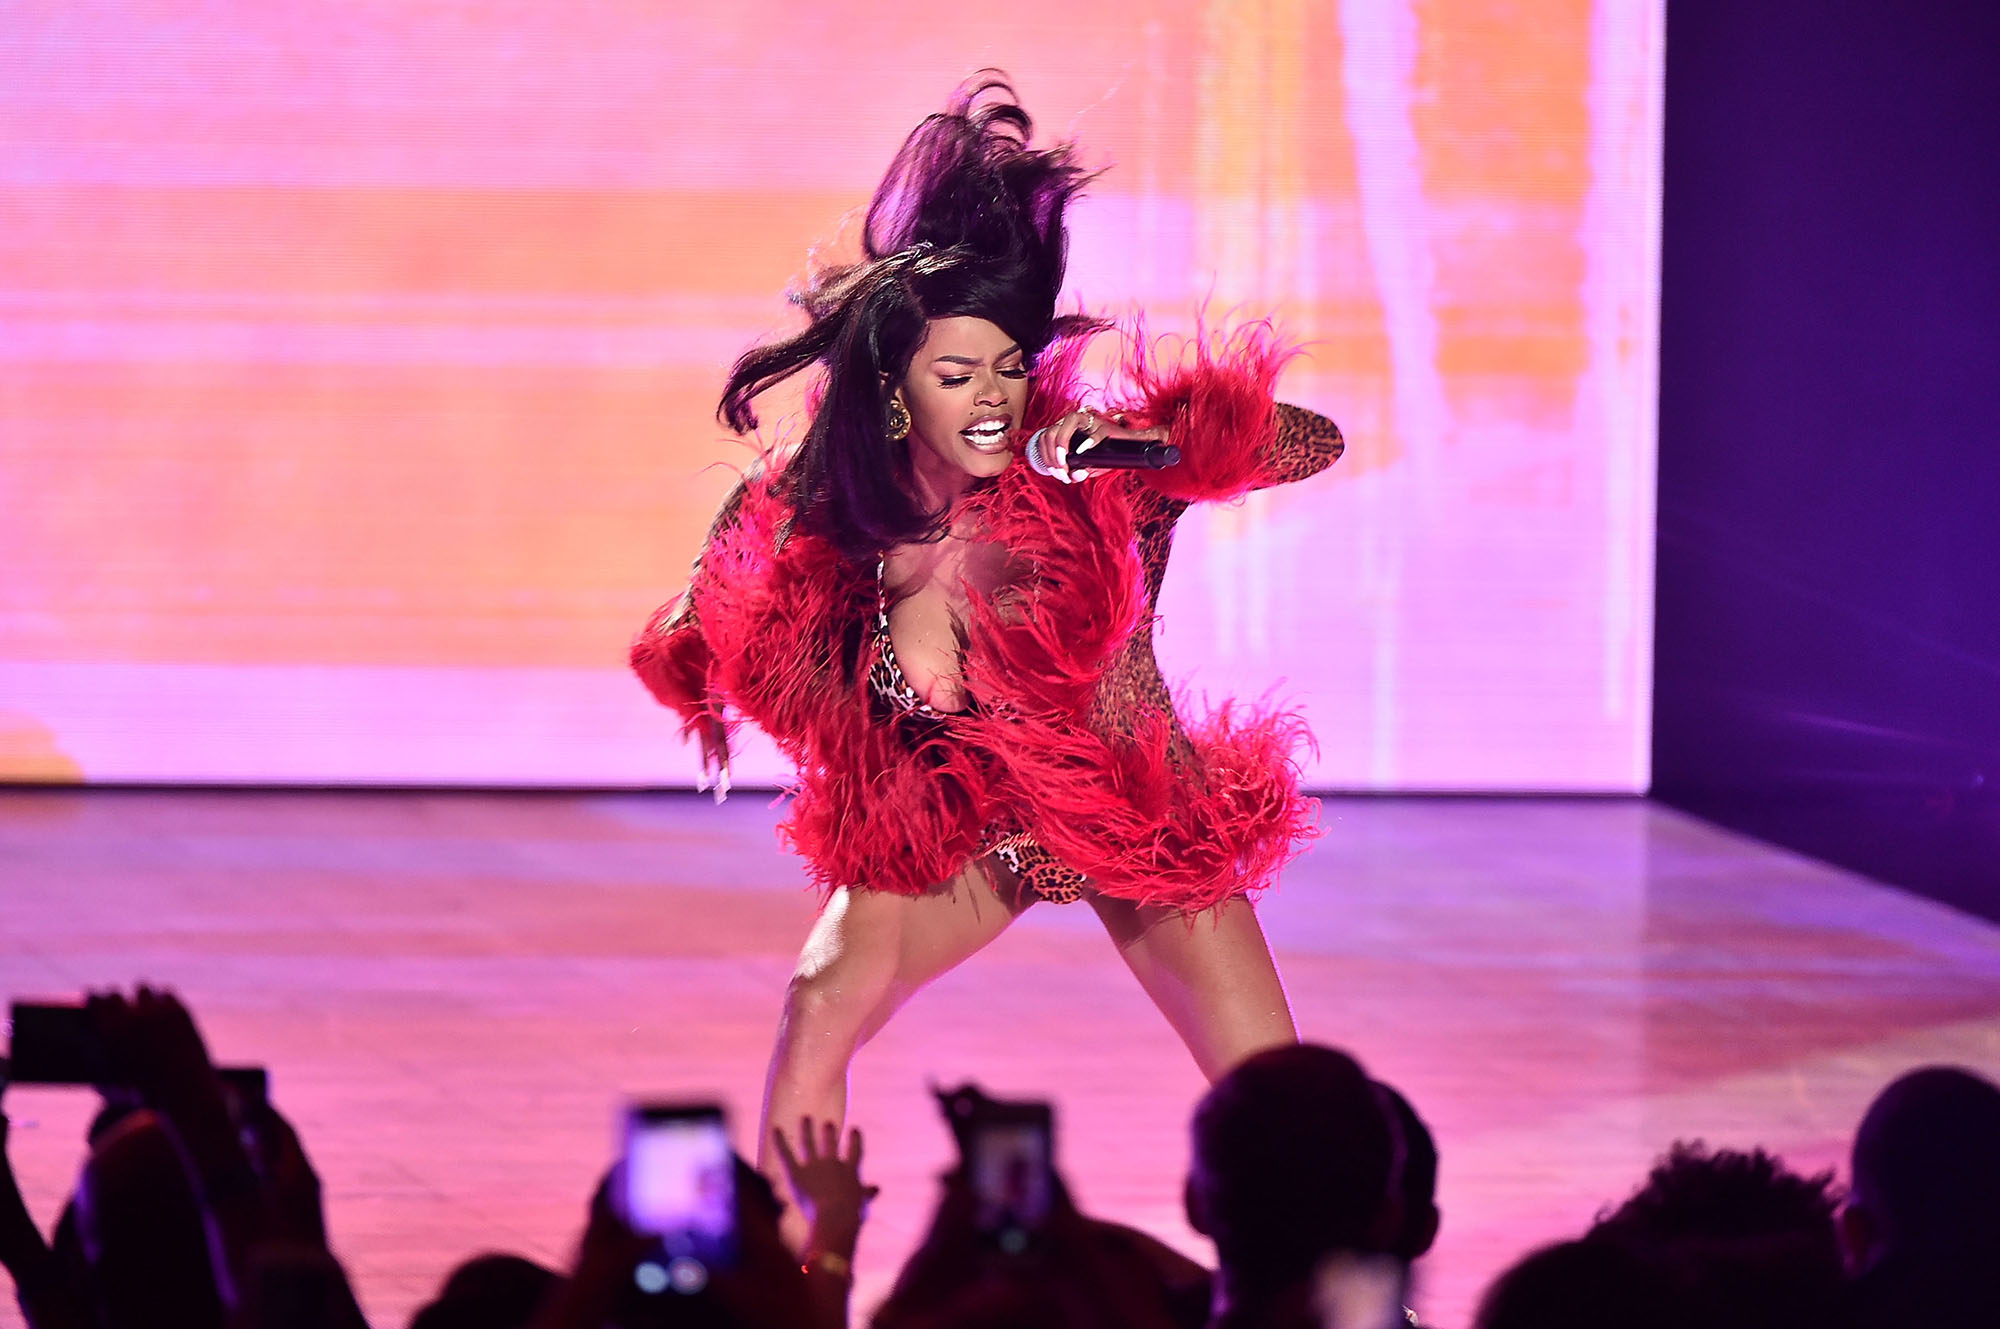 Teyana Taylor performs onstage during the VH1 Hip Hop Honors: All Hail The Queens at David Geffen Hall on July 11, 2016 in New York City.  (Photo by Theo Wargo/Getty Images for VH1) (Theo Wargo—Getty Images for VH1)